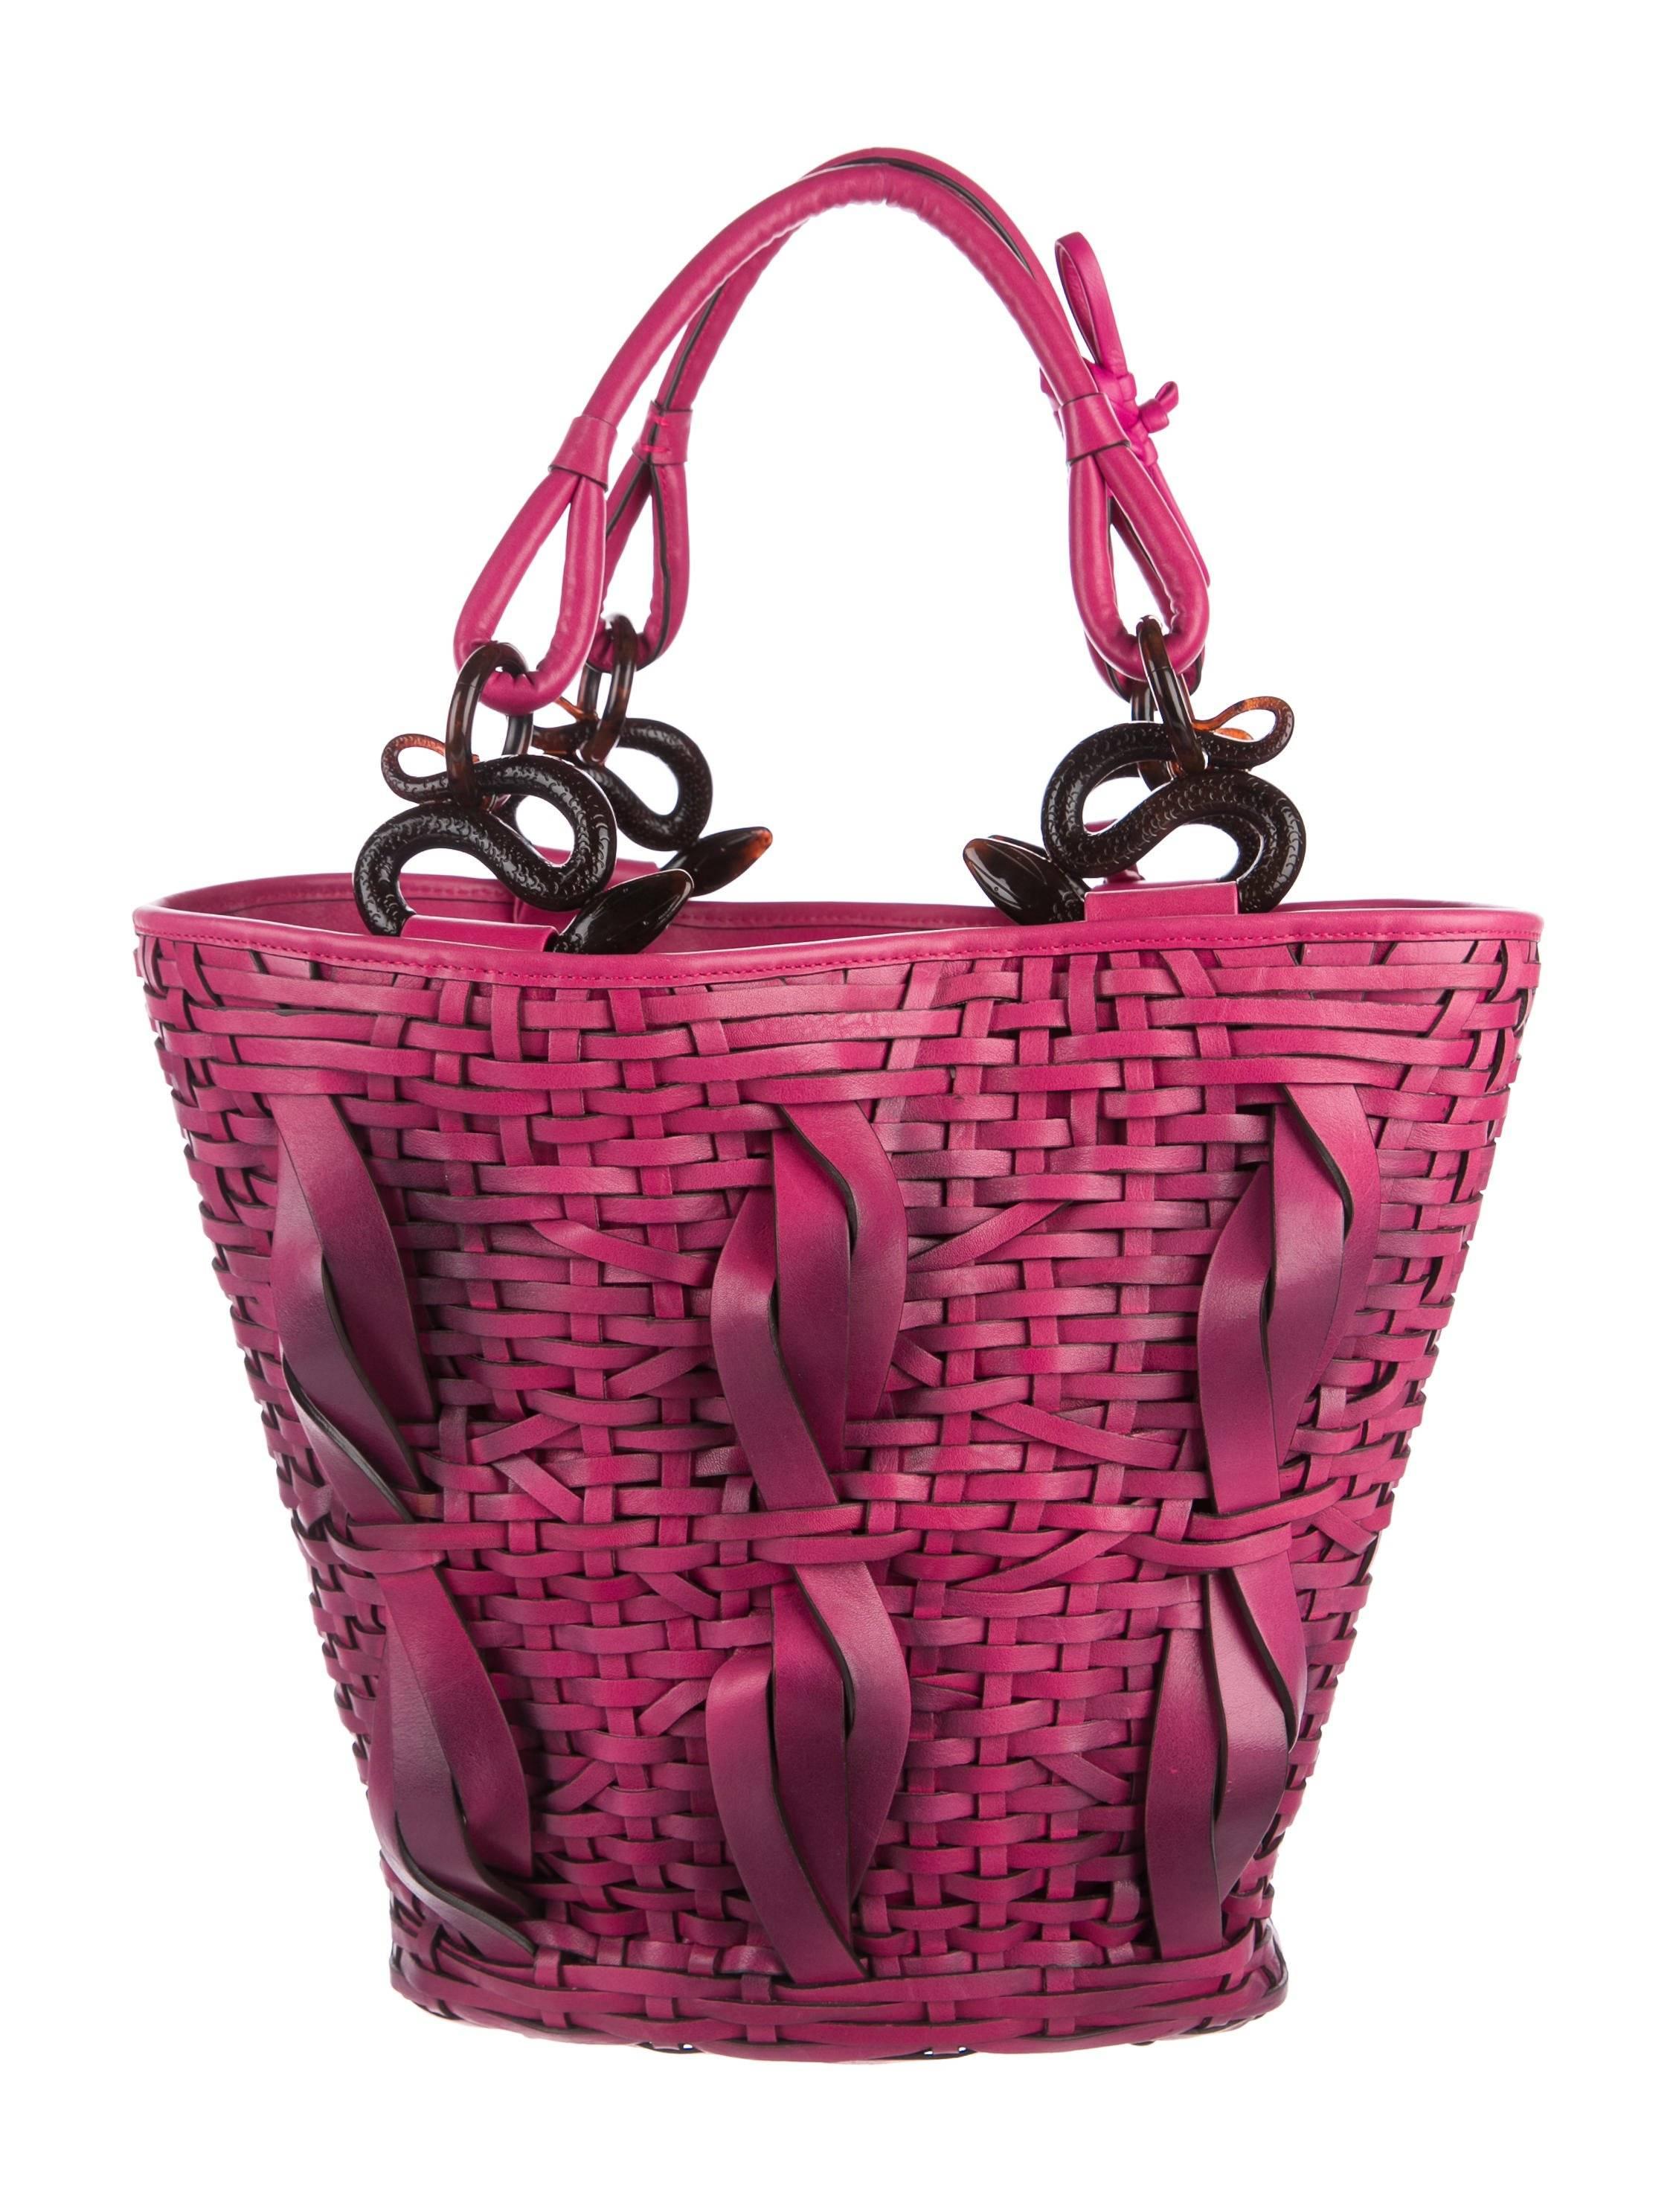 Christian Dior NEW Fuchsia Basket Weave Leather Top Handle Satchel Hand Bag

Leather
Resin
Silver tone hardware
Woven lining 
Shoulder strap drop 7.5